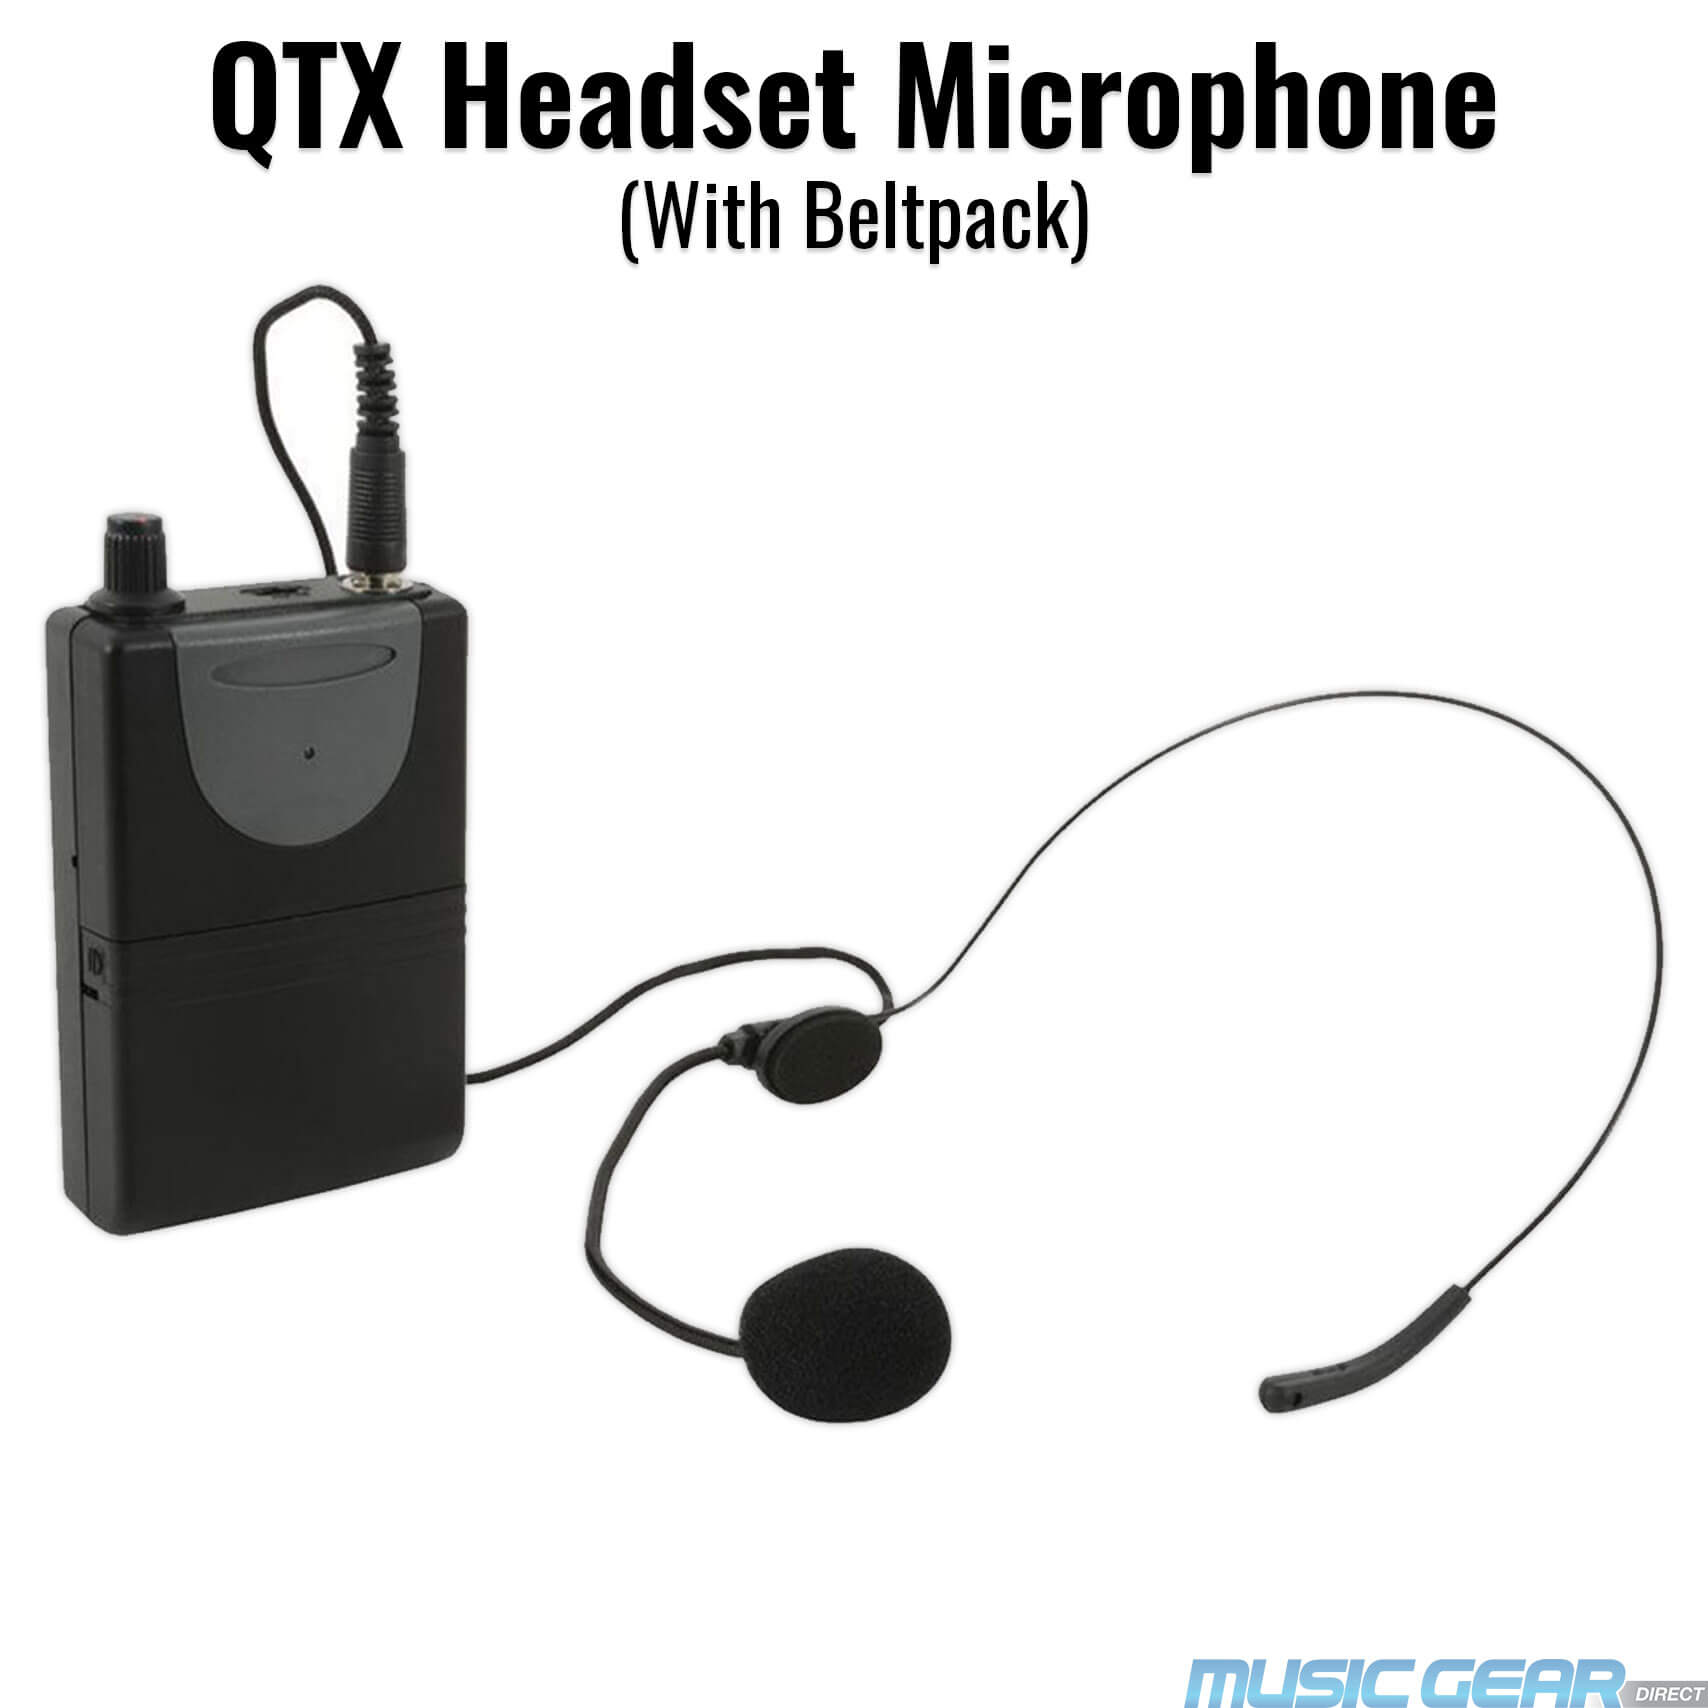 QTX Headset and Beltpack for QX and QR PA systems